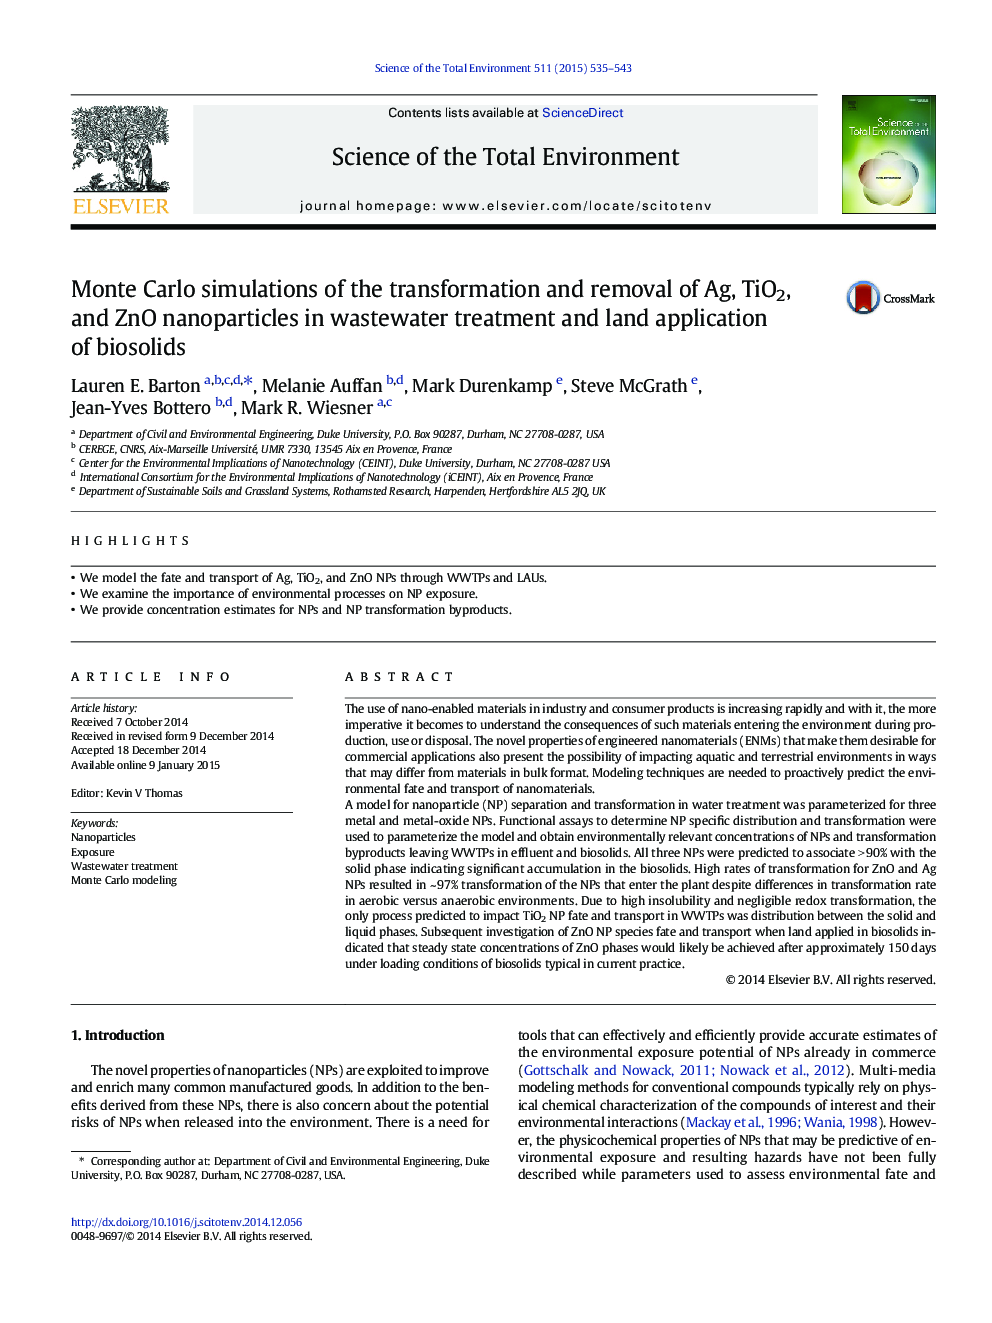 Monte Carlo simulations of the transformation and removal of Ag, TiO2, and ZnO nanoparticles in wastewater treatment and land application of biosolids